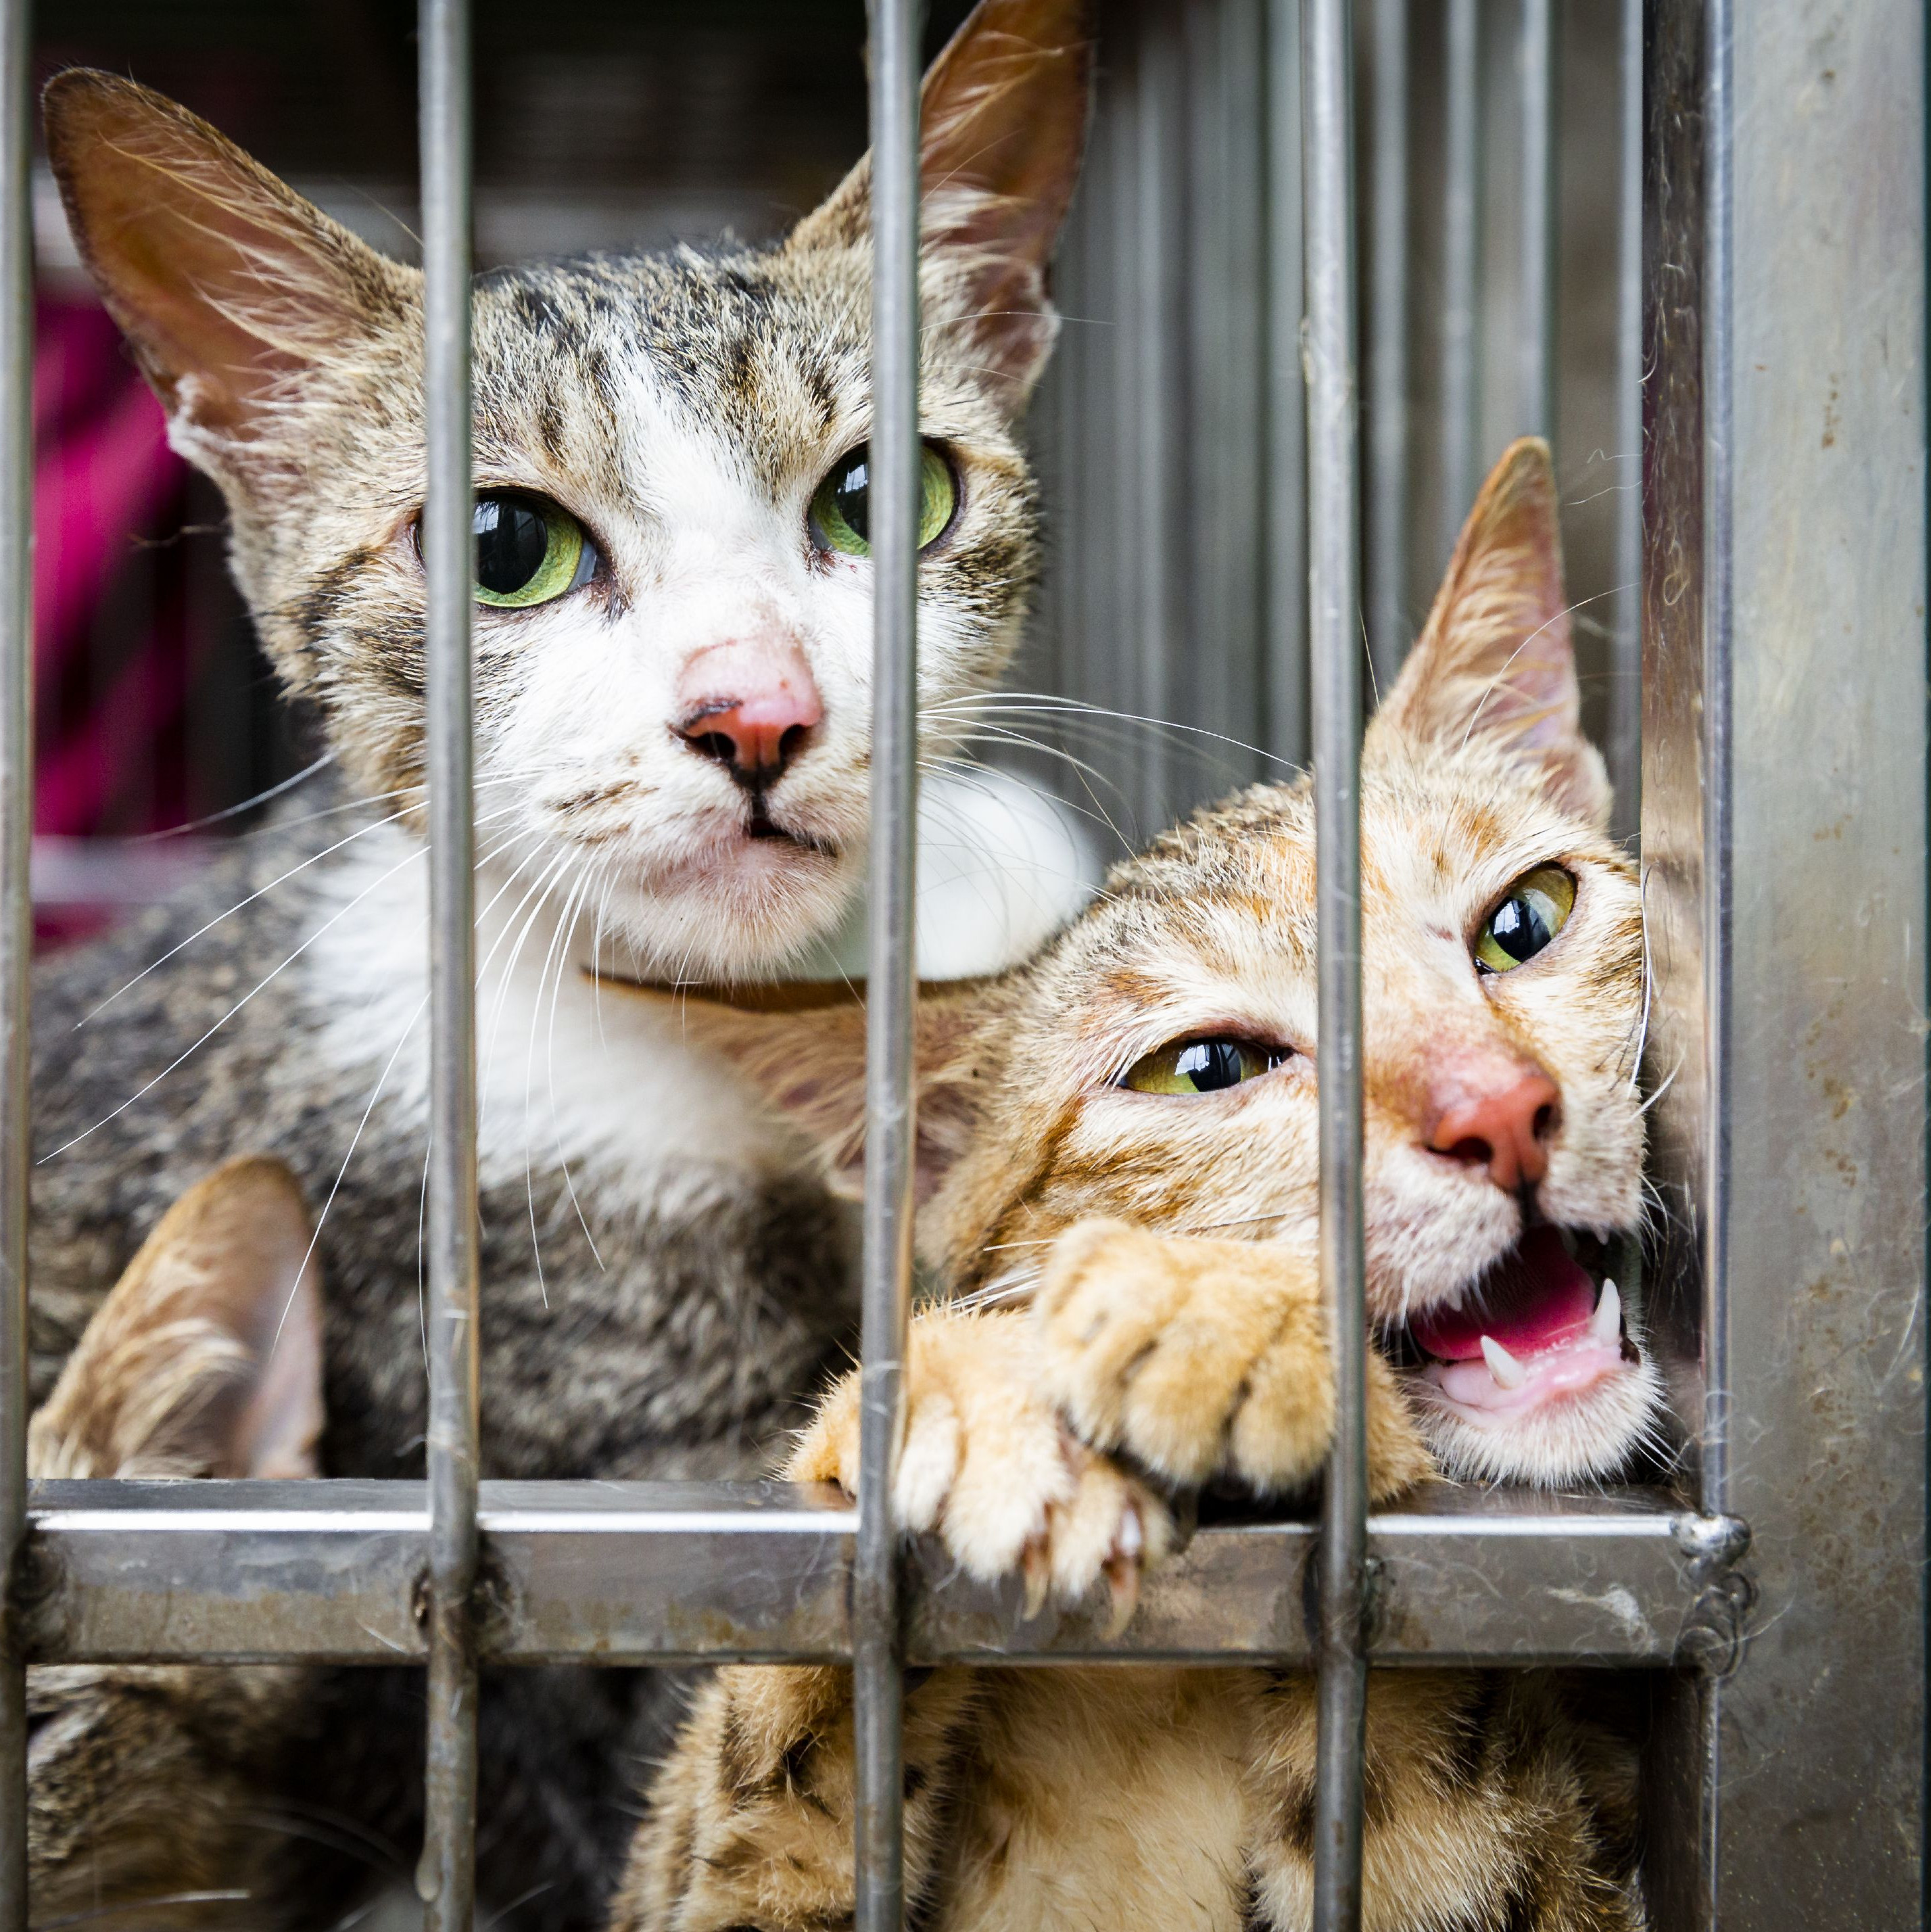 Cats looking out of cafe in the cat meat trade 